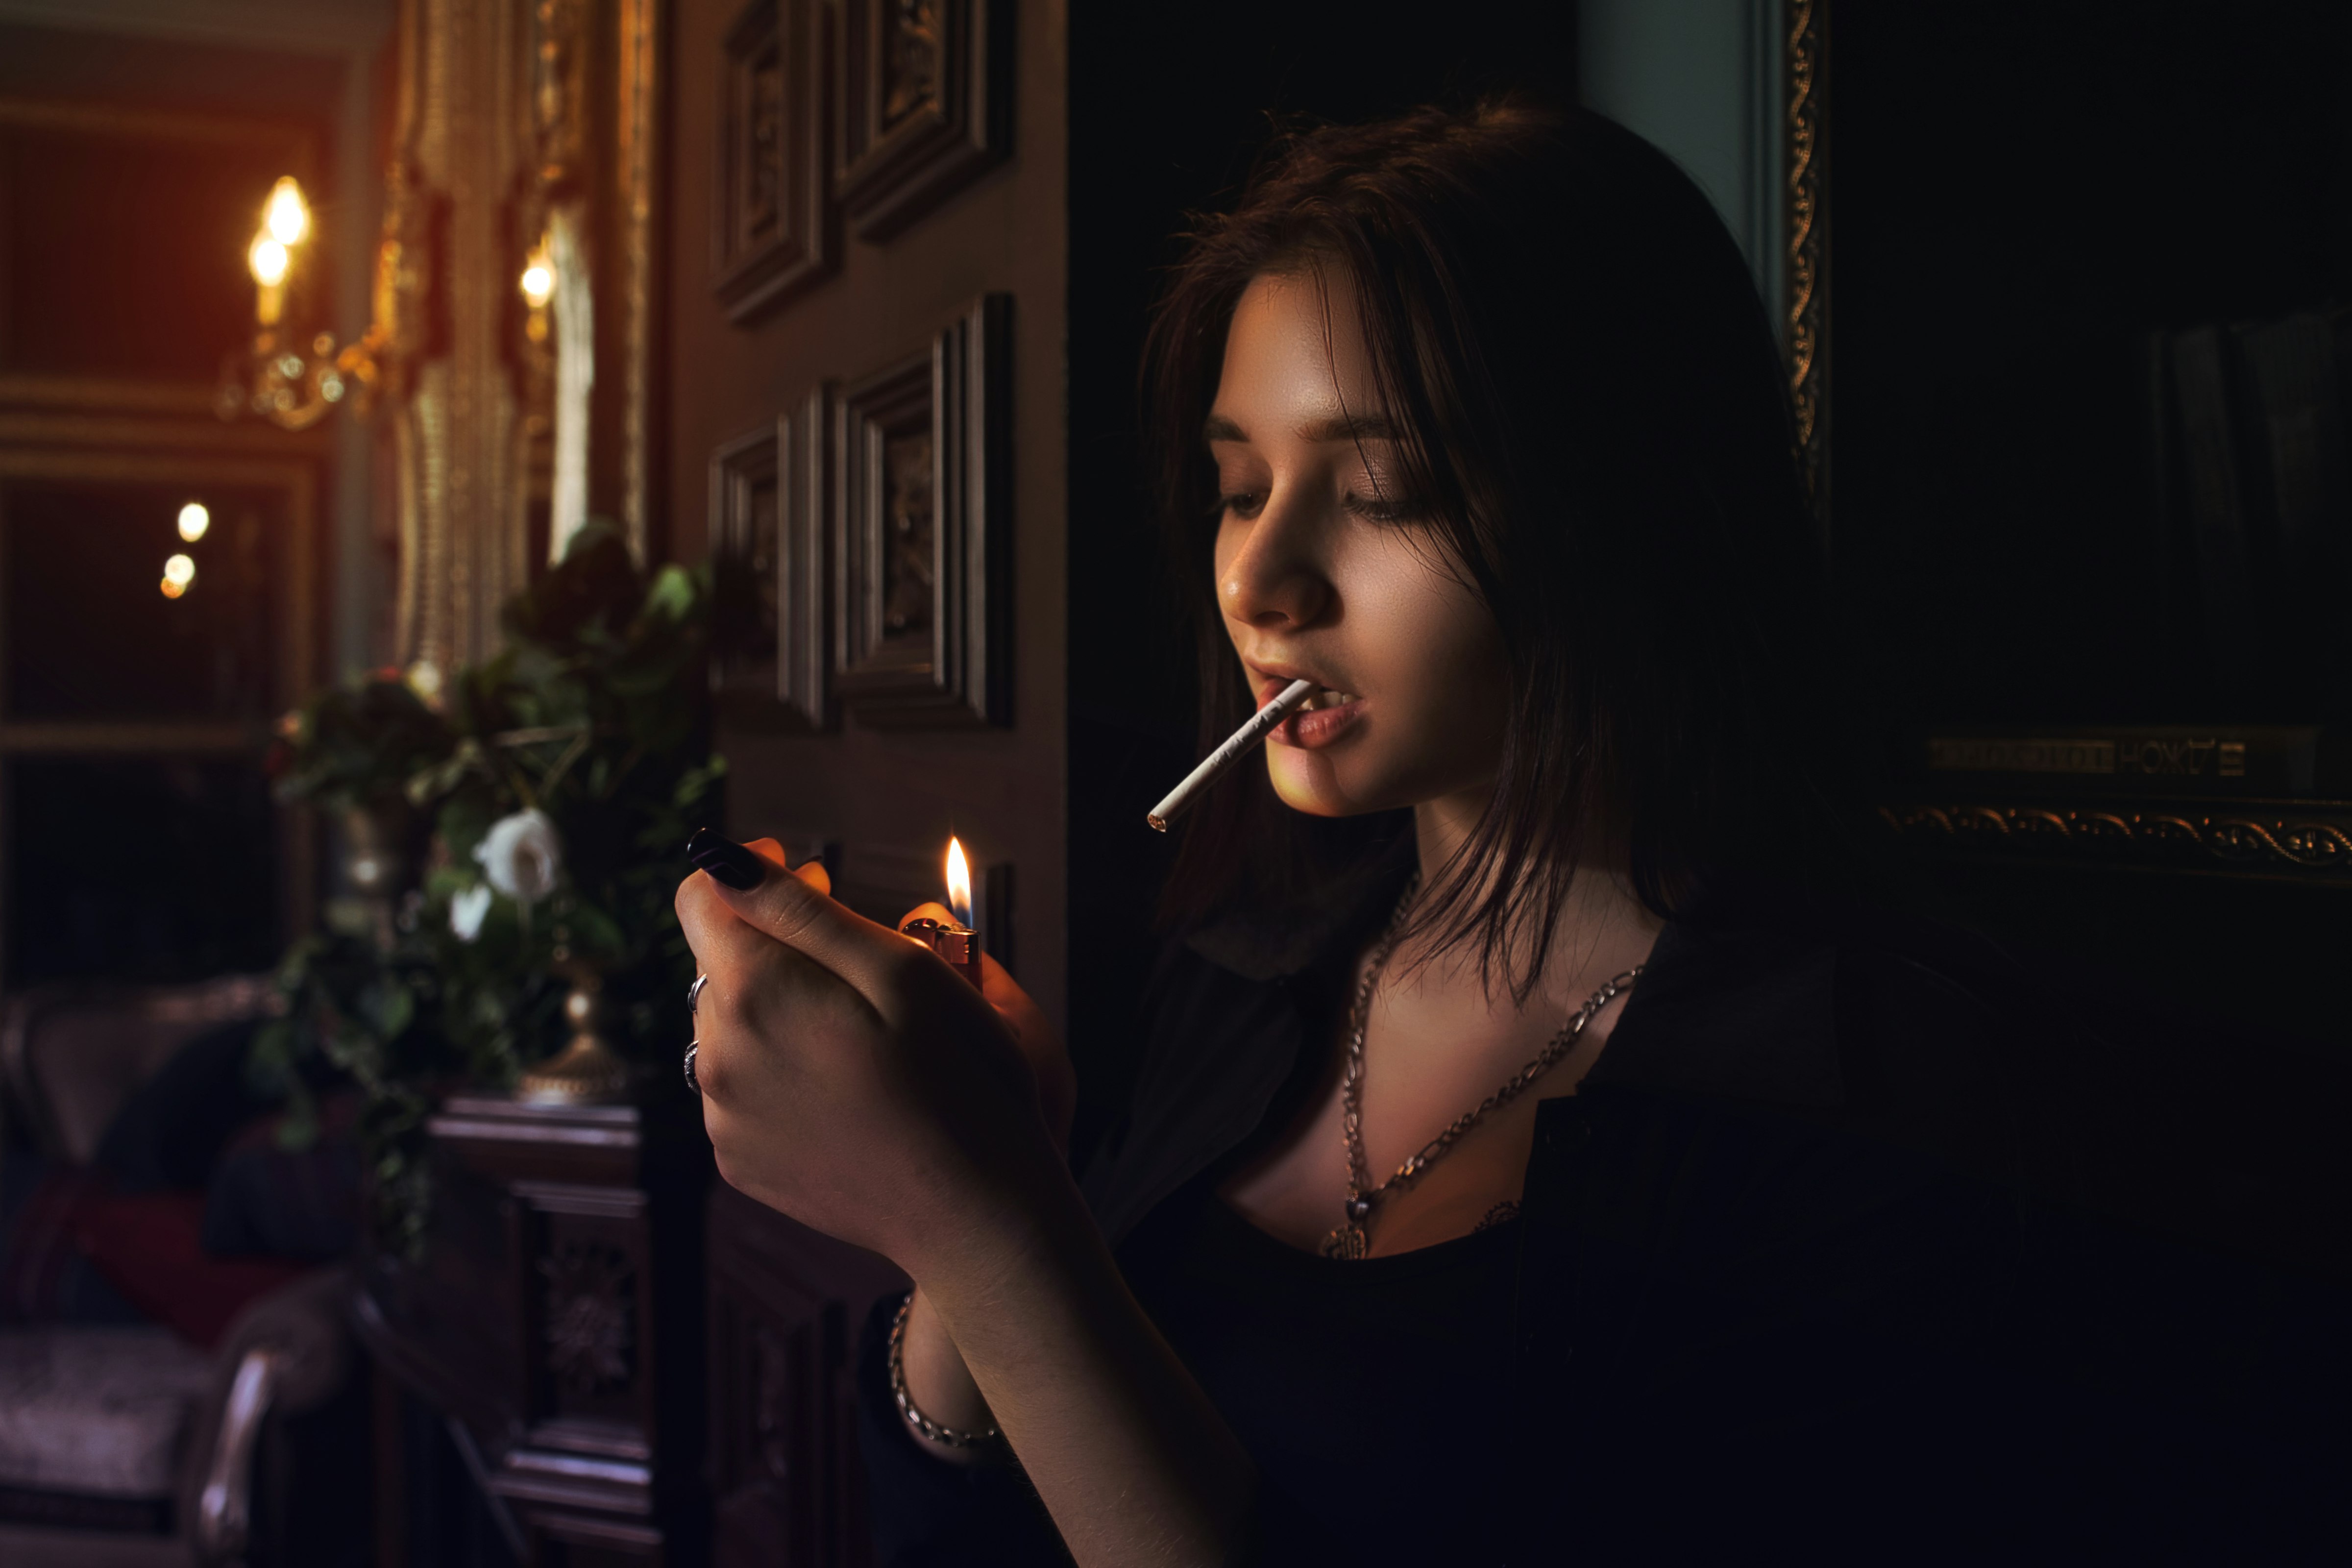 woman lighting cigarette stick in front of green plant